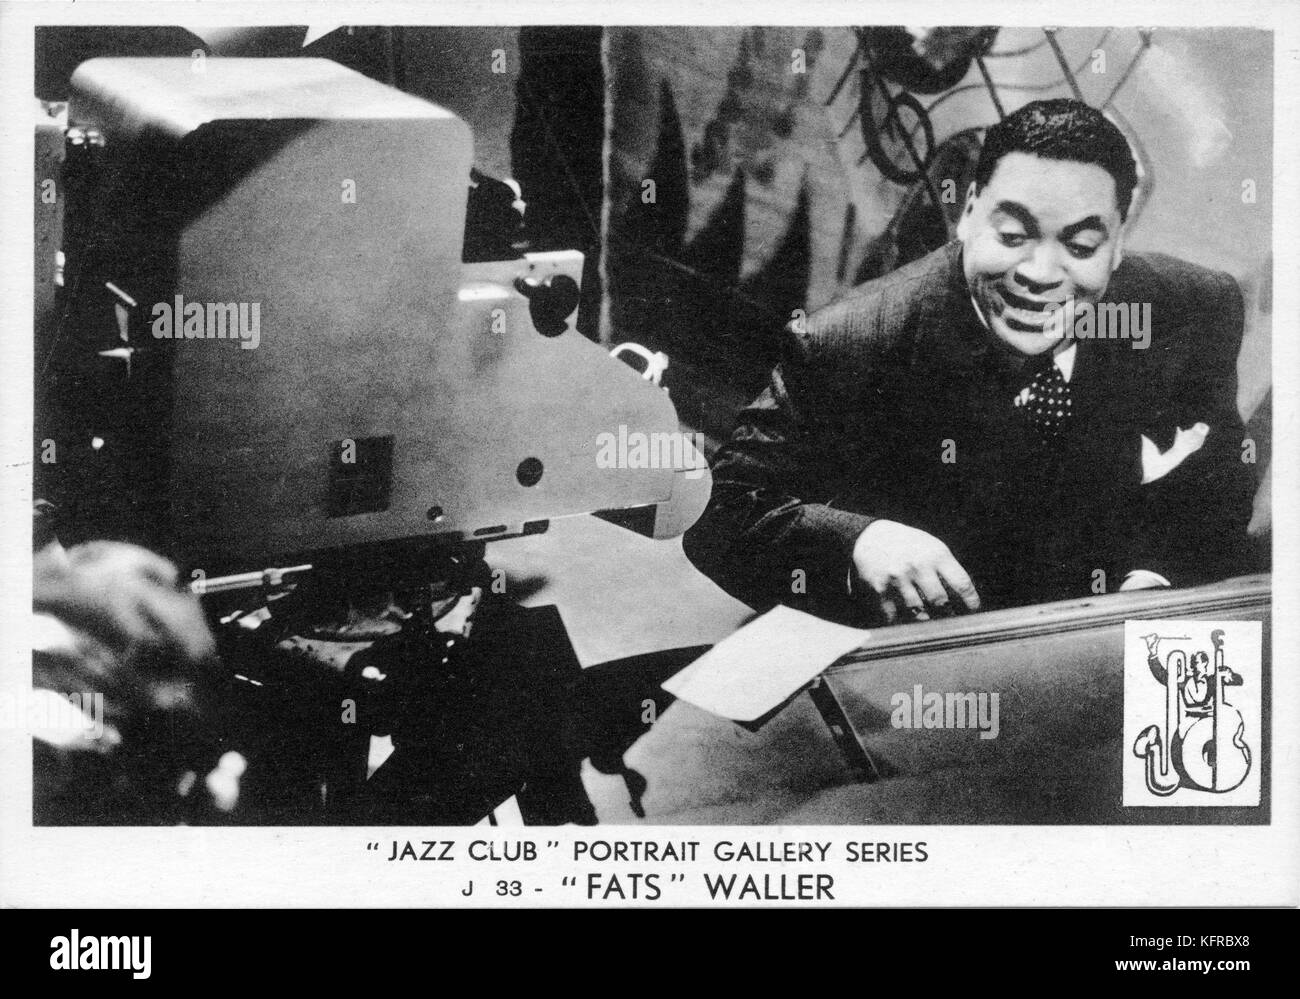 Fats Waller - portrait. Thomas Wright Waller, American jazz pianist, singer and composer: 21 May 1904 – 15 December 1943. No. 33 in the 'Jazz Club' Portrait Gallery series. Stock Photo